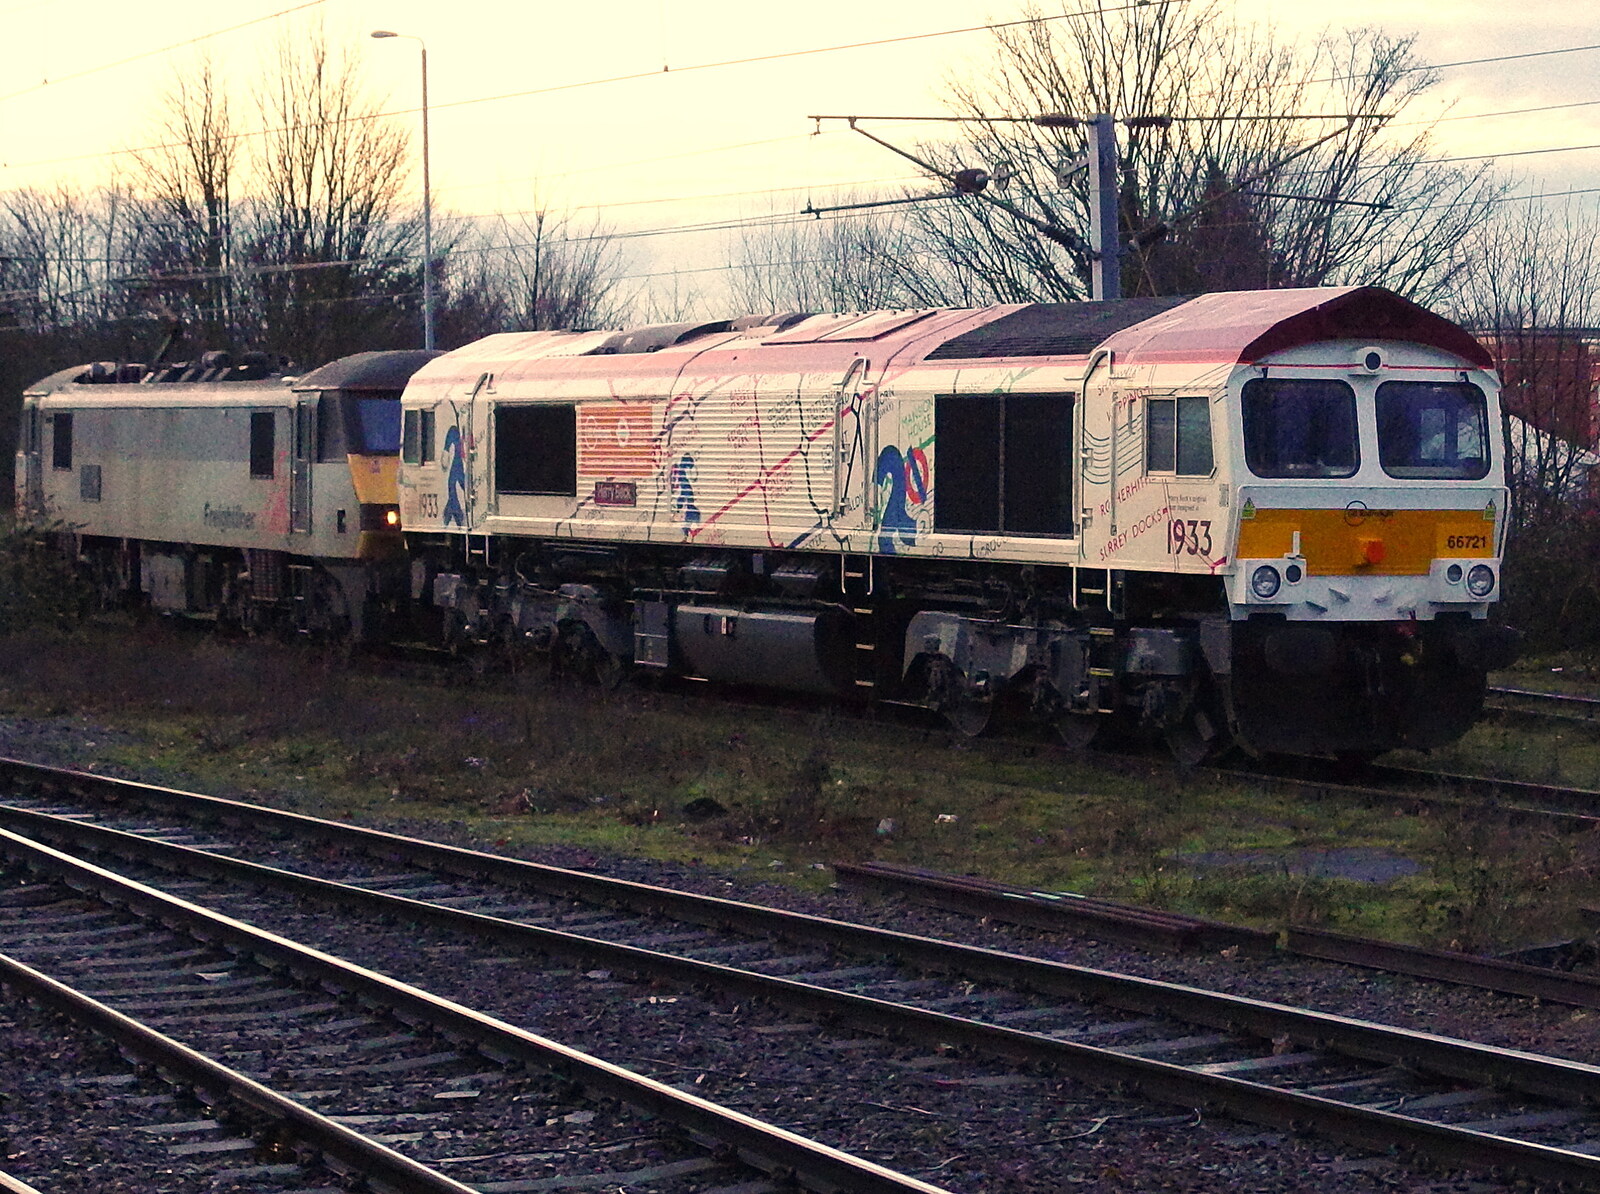 Class 66/7 66721 'Harry Beck' at Ipswich from SwiftKey Innovation, The Hub, Westminster, London - 21st February 2014